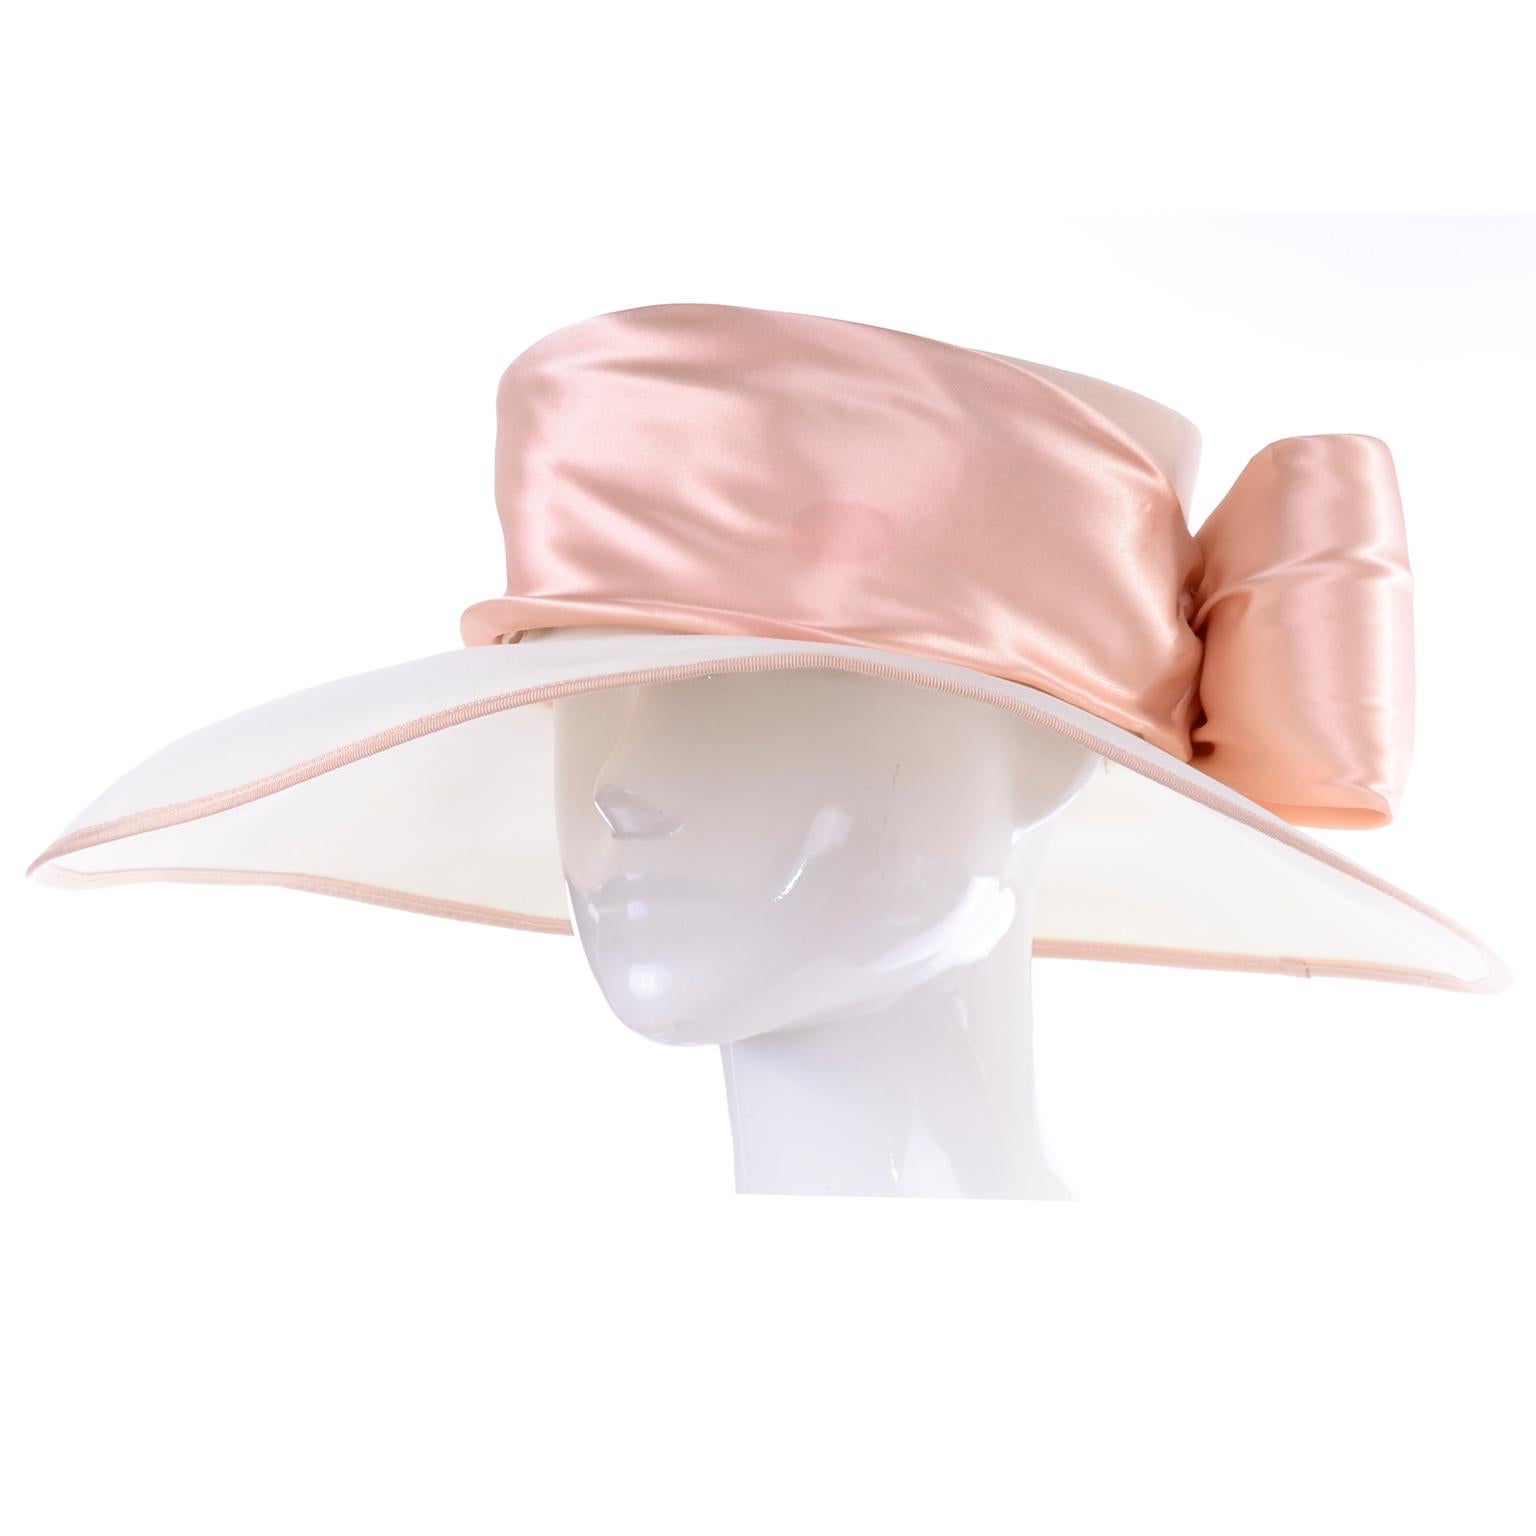 This is a beautiful curved wide brim hat by Peter Bettley with peach pink trim and a large satin ribbon with a bow in the back. The brim is cream and the top of the hat is also a neutral peach pink color! Milliner Peter Bettley was trained as an